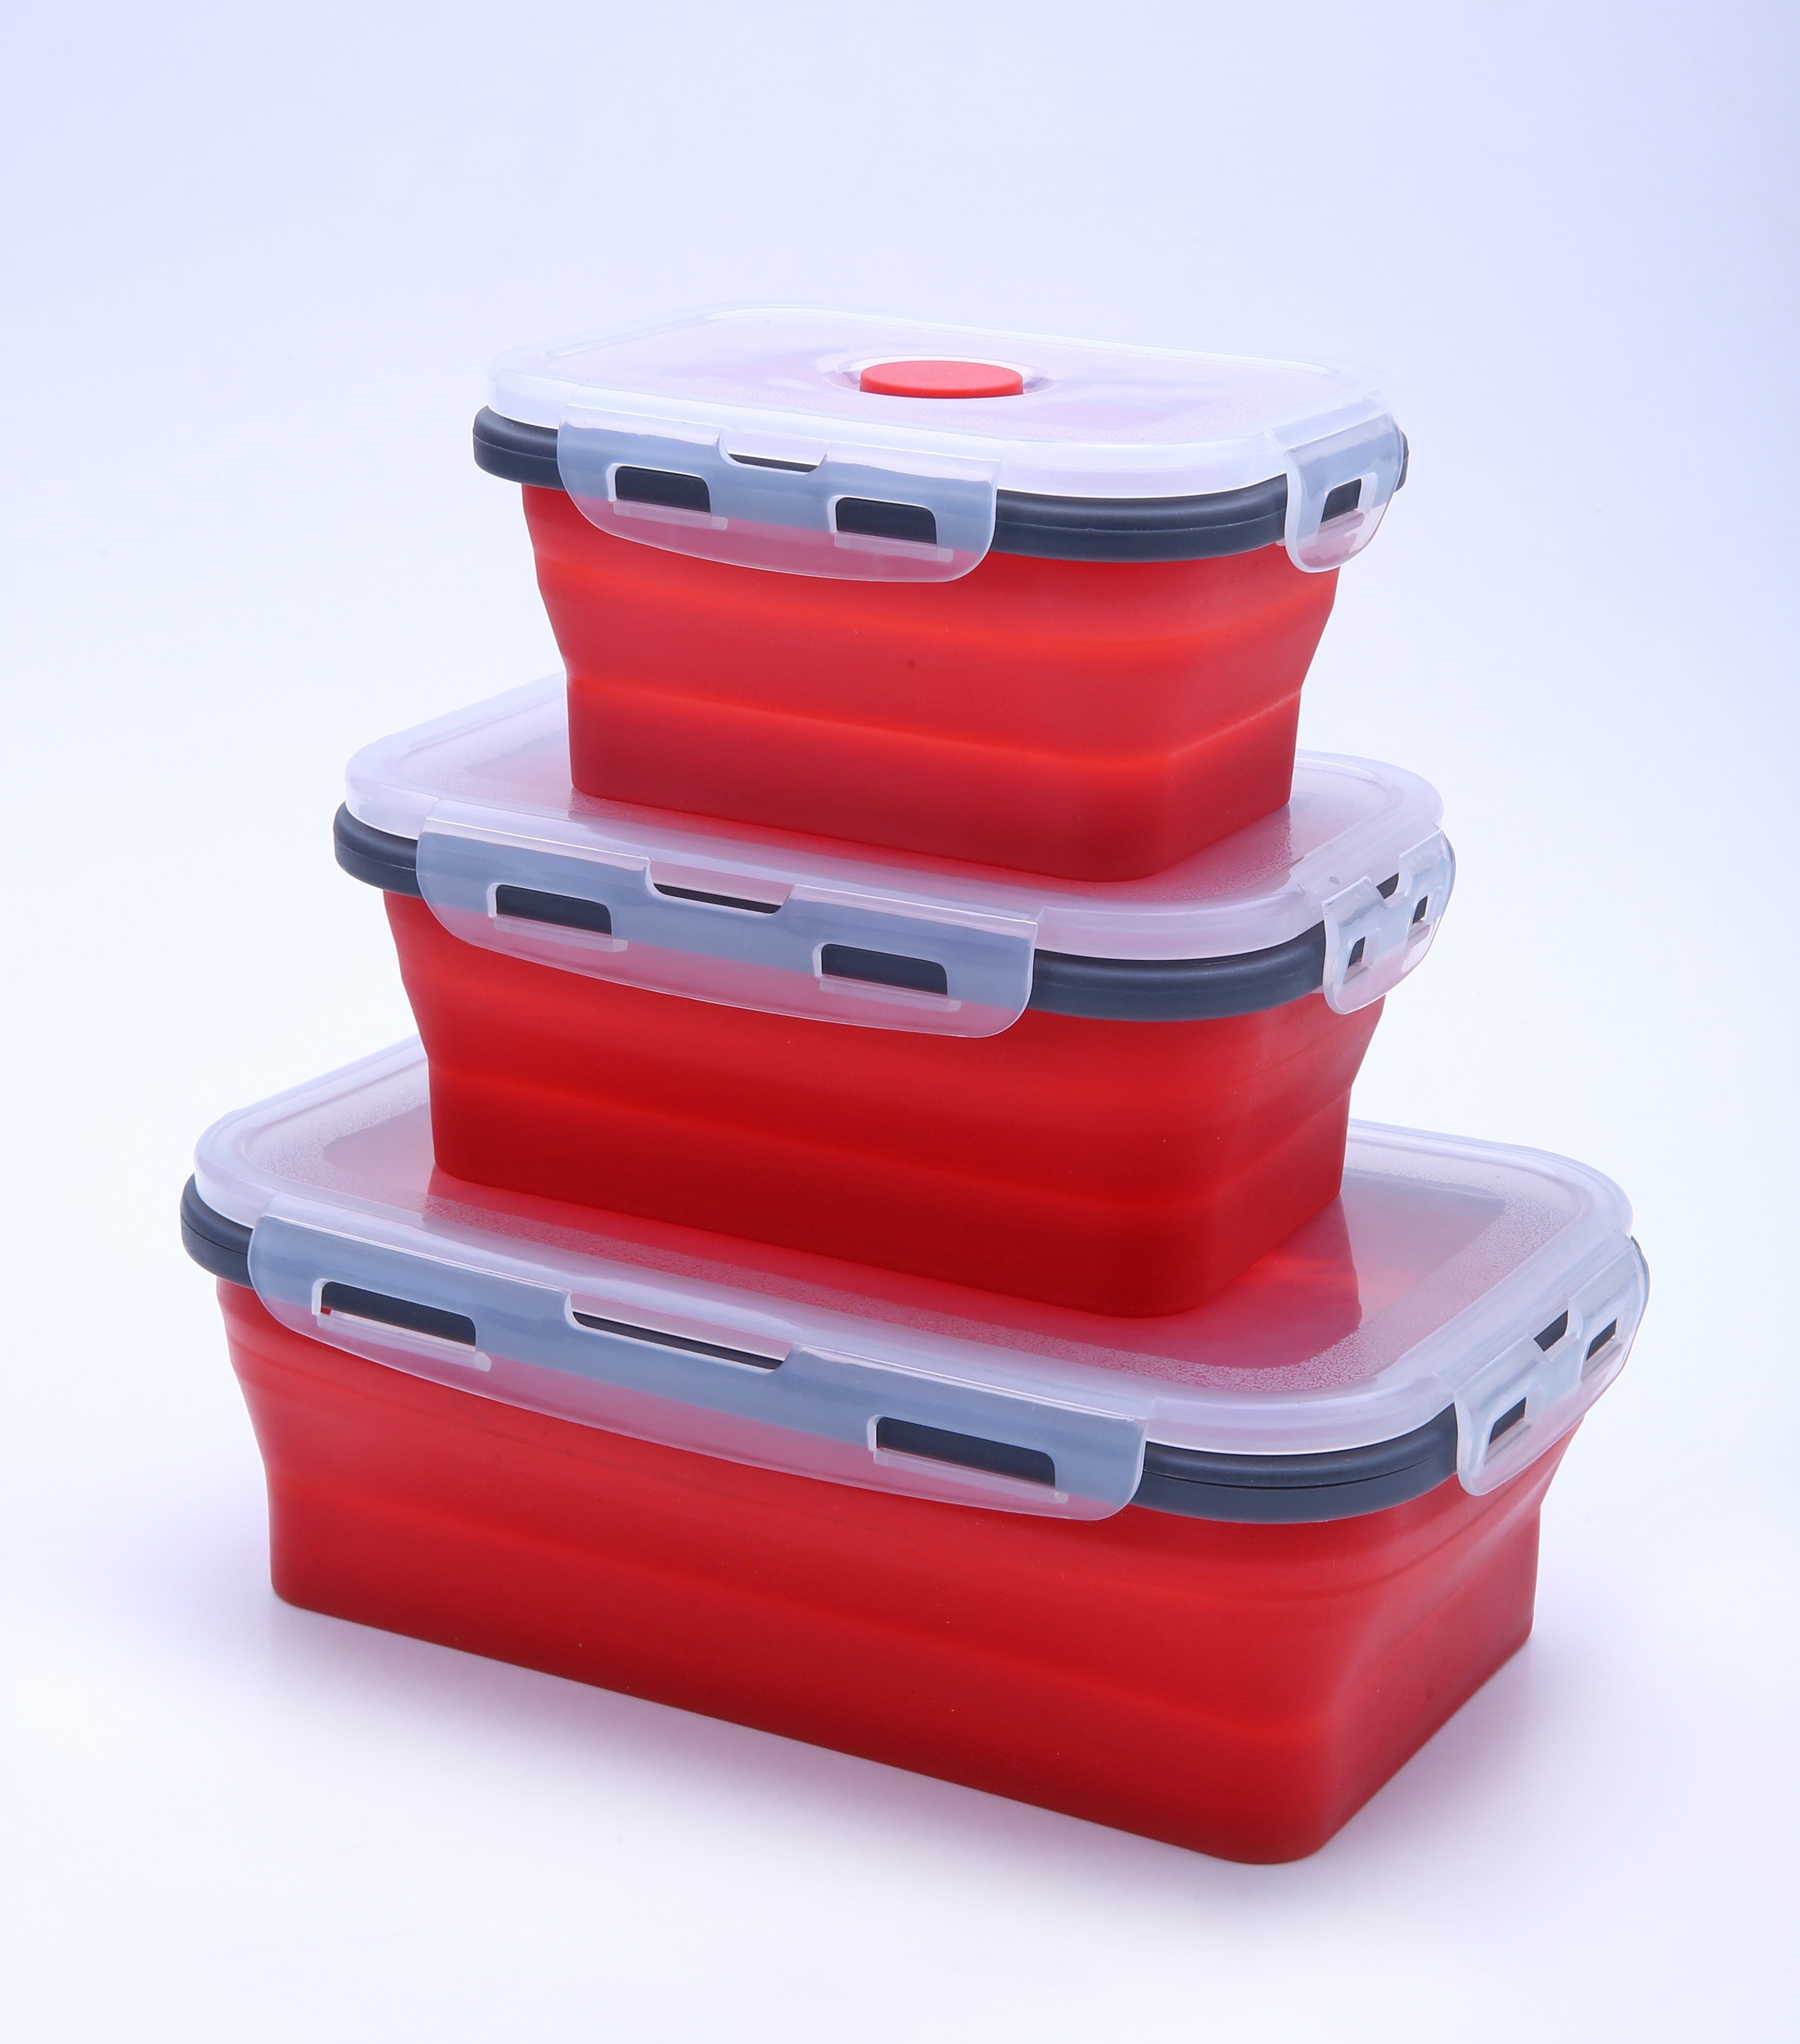 Takeaway boxes are a great way to store leftovers for later, so why don’t we take the shame out of bringing one’s own to restaurants? Photo: Shutterstock